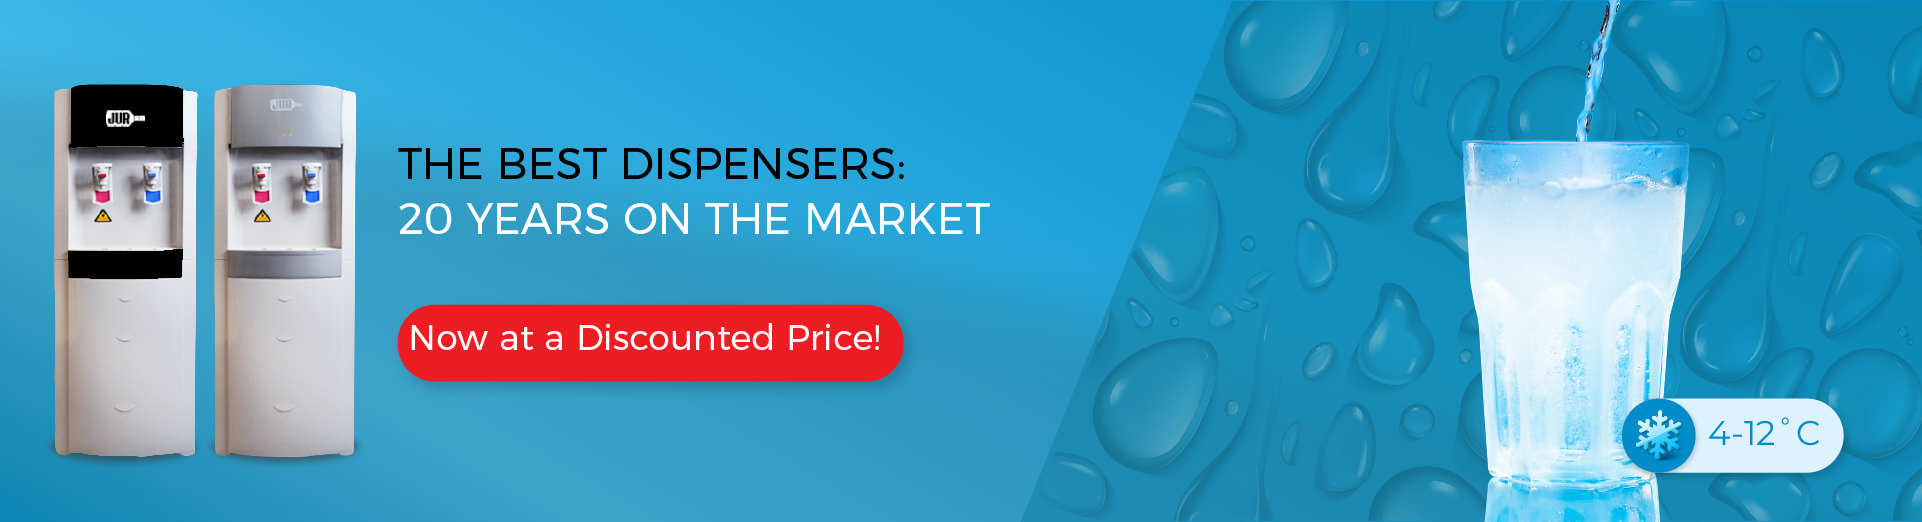 The Best Dispensers: 20 Years on the Market, Now at a Discounted Price!